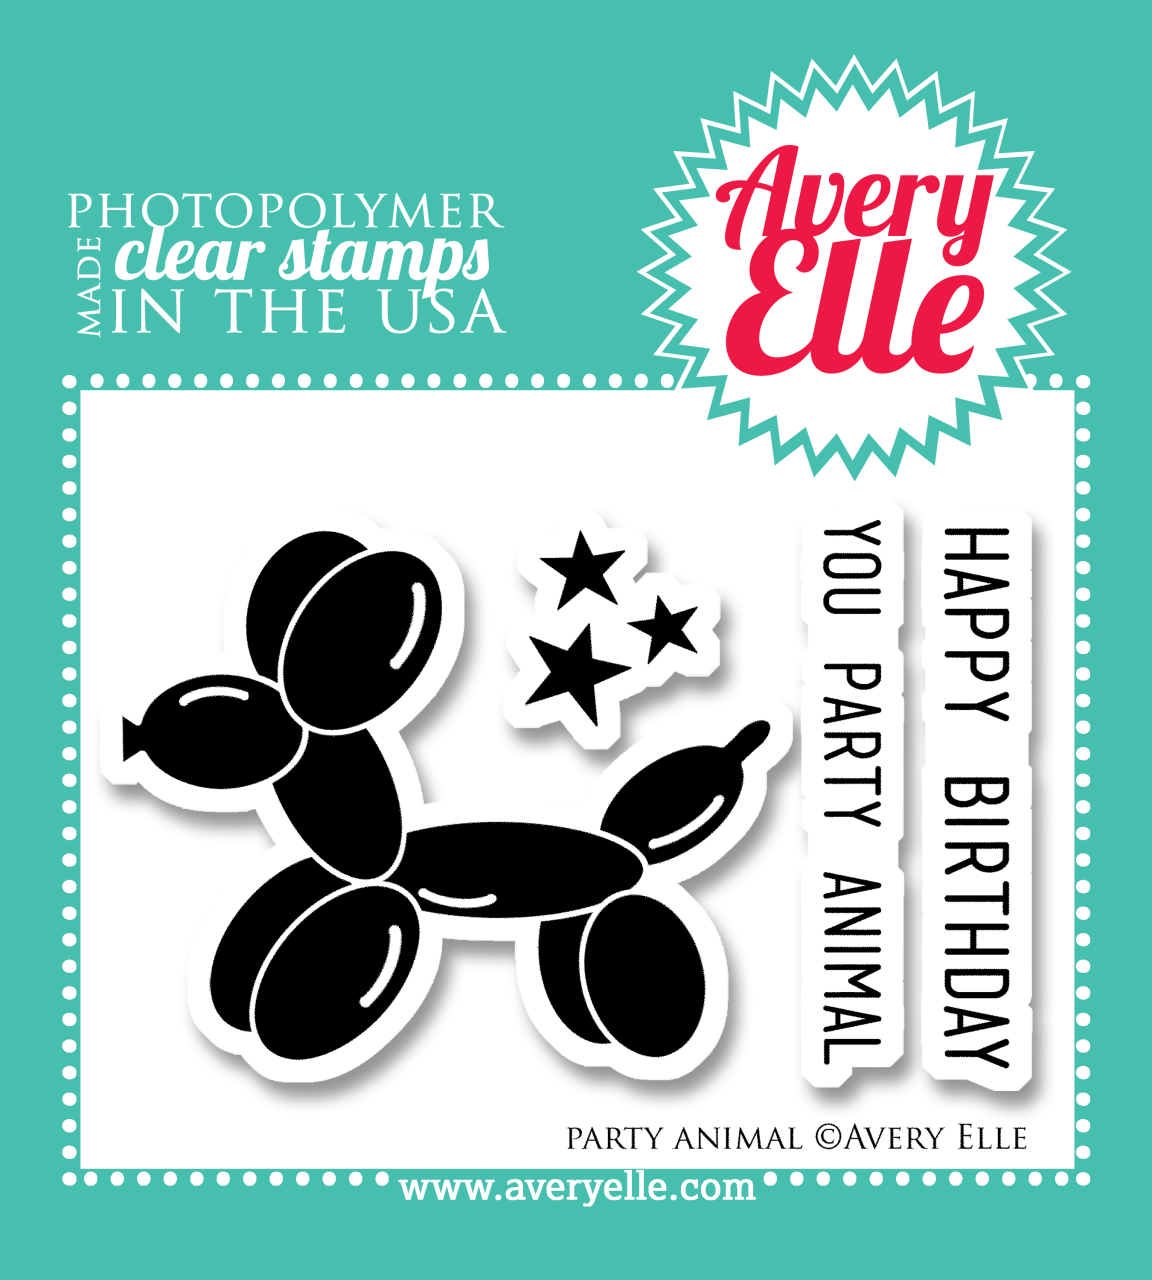 Our 2" x 3" Party Animal clear photopolymer stamp set is mini in size but oh so fun.  This set was created in honor of Avery Elle's first birthday in June 2013.